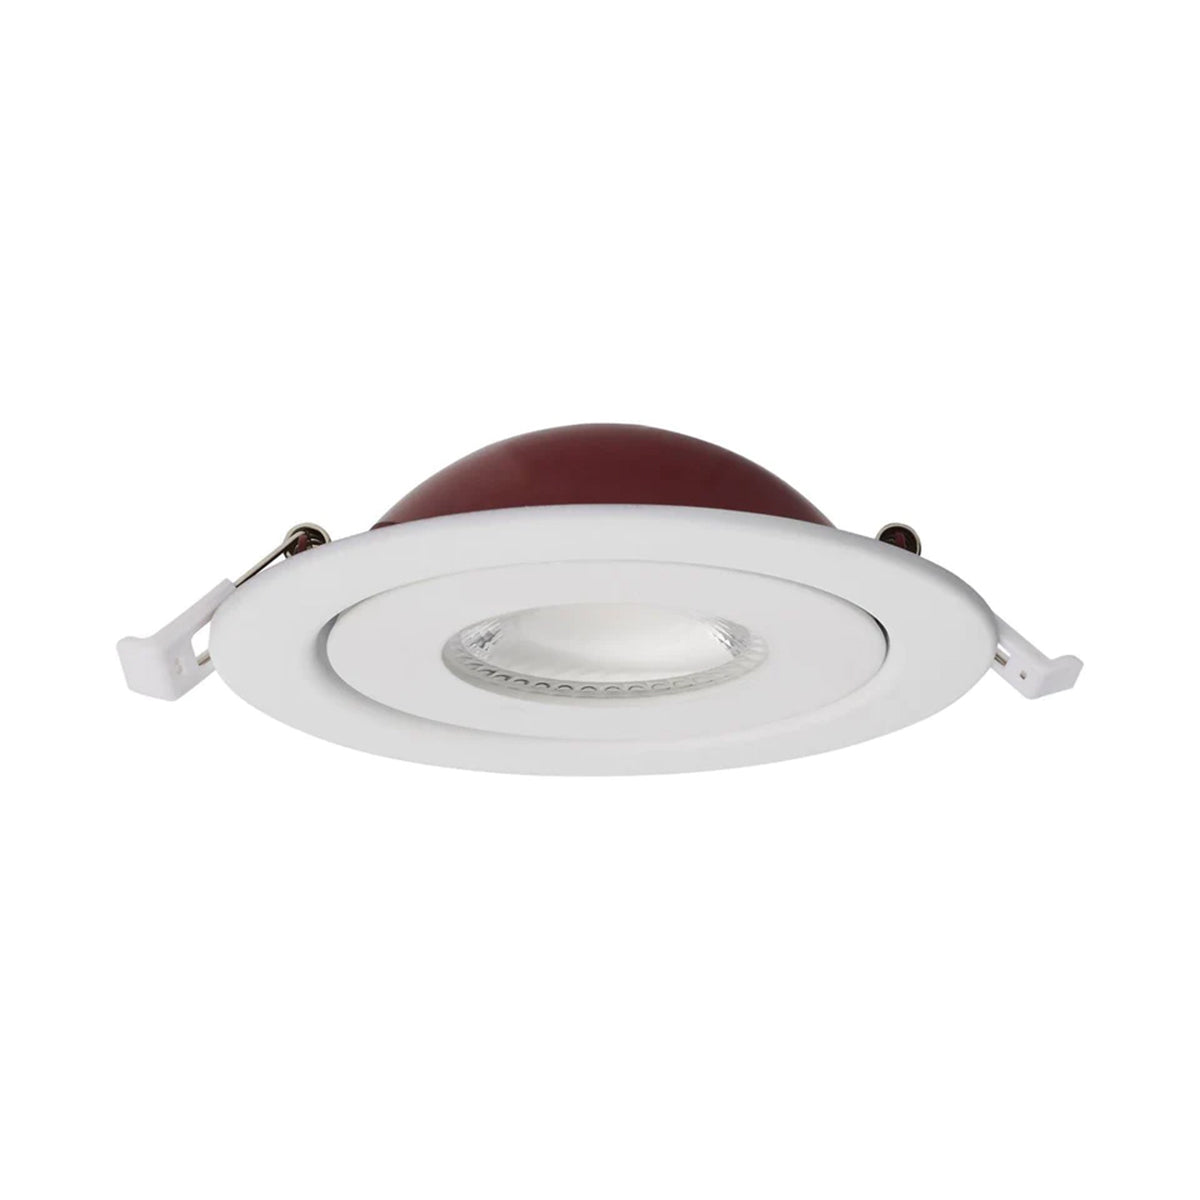 4 Inch Round LED Fire Rated Directional Downlight, 9 Watt, 650 Lumens, Selectable CCT 2700K to 5000K, Adjustable Trim, White Finish